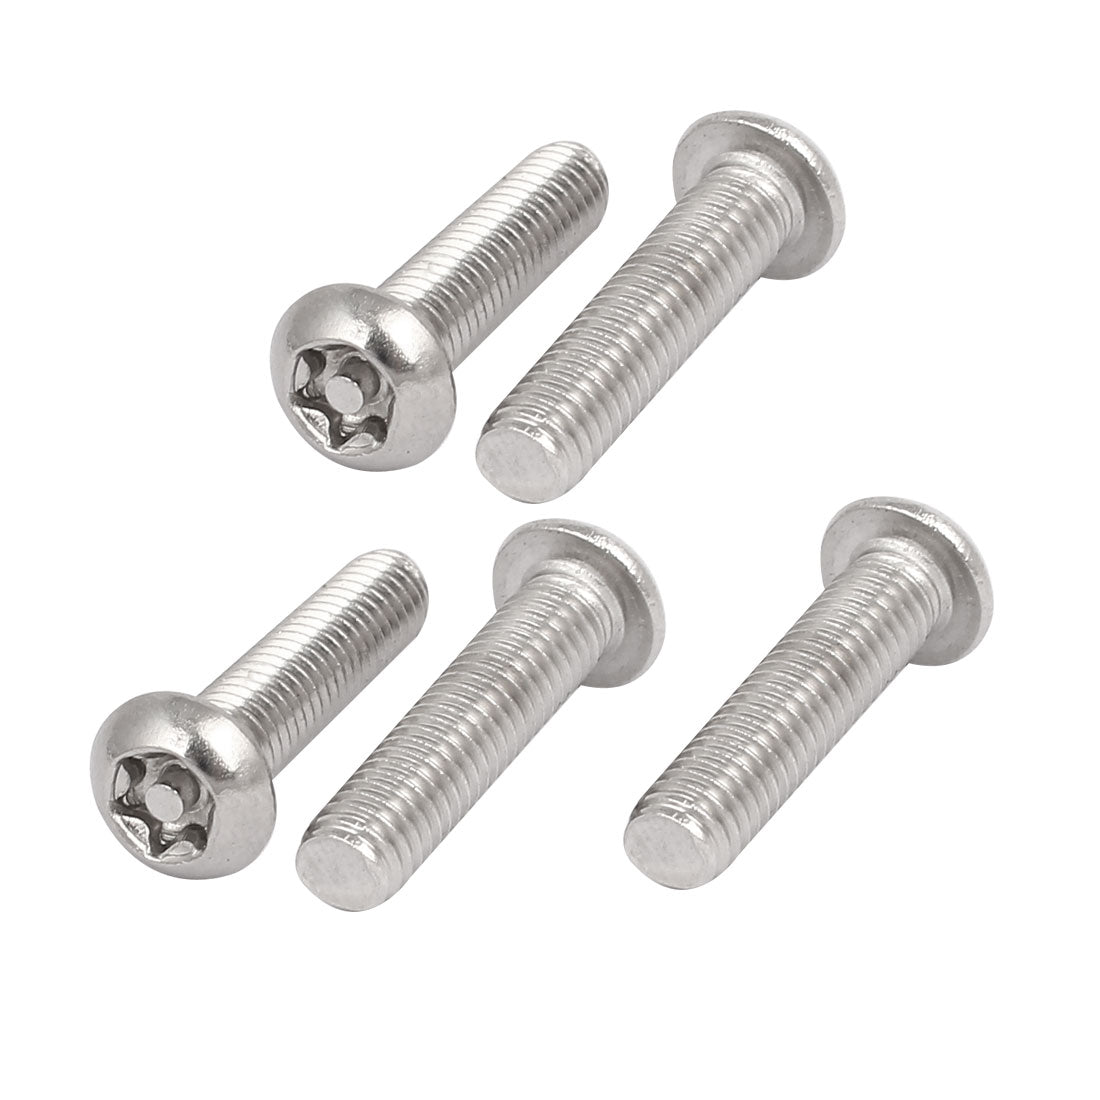 uxcell Uxcell M6x25mm 304 Stainless Steel Button Head Torx Security Tamper Proof Screws 5pcs